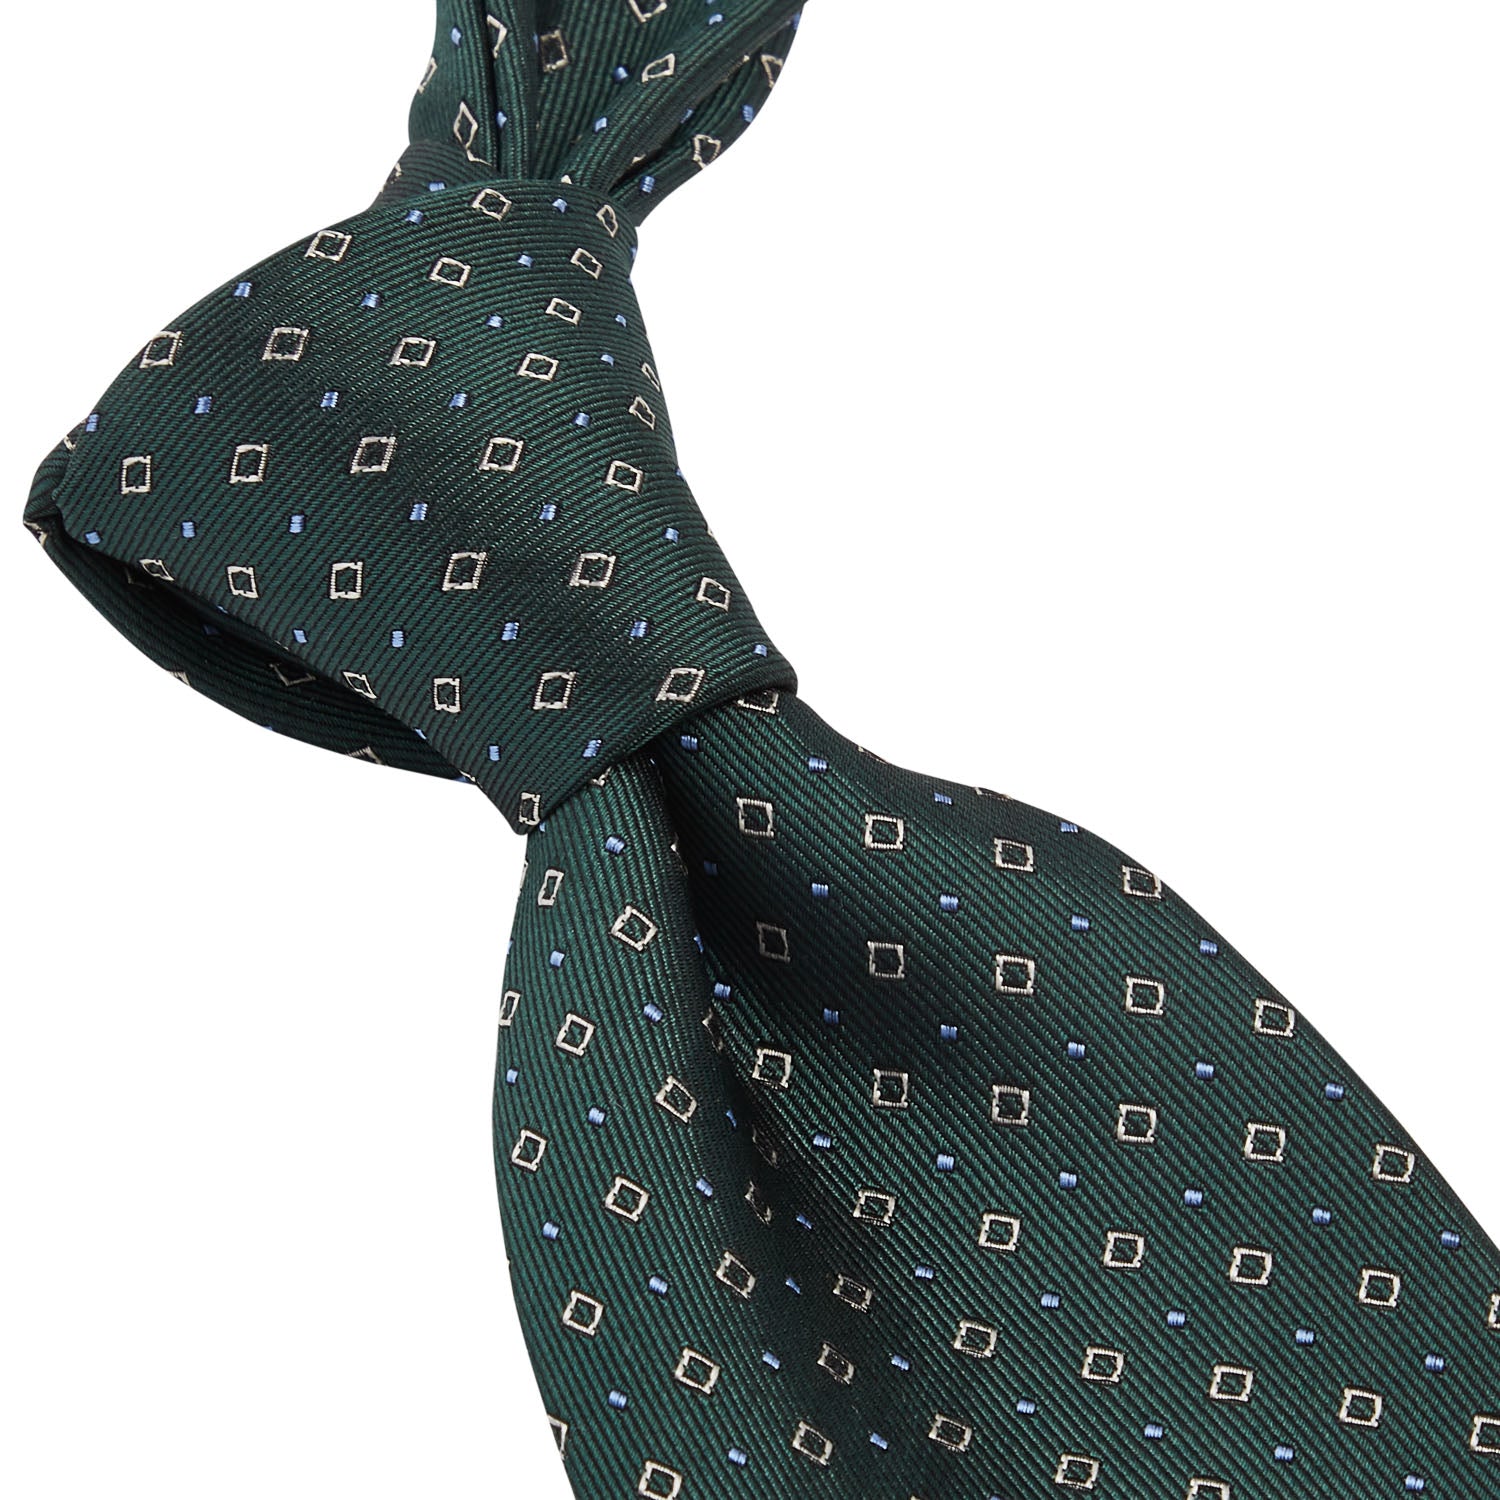 A Sovereign Grade Forest Green Alternating Square Dot Jacquard Tie by KirbyAllison.com, perfect for dressing up in the United Kingdom.